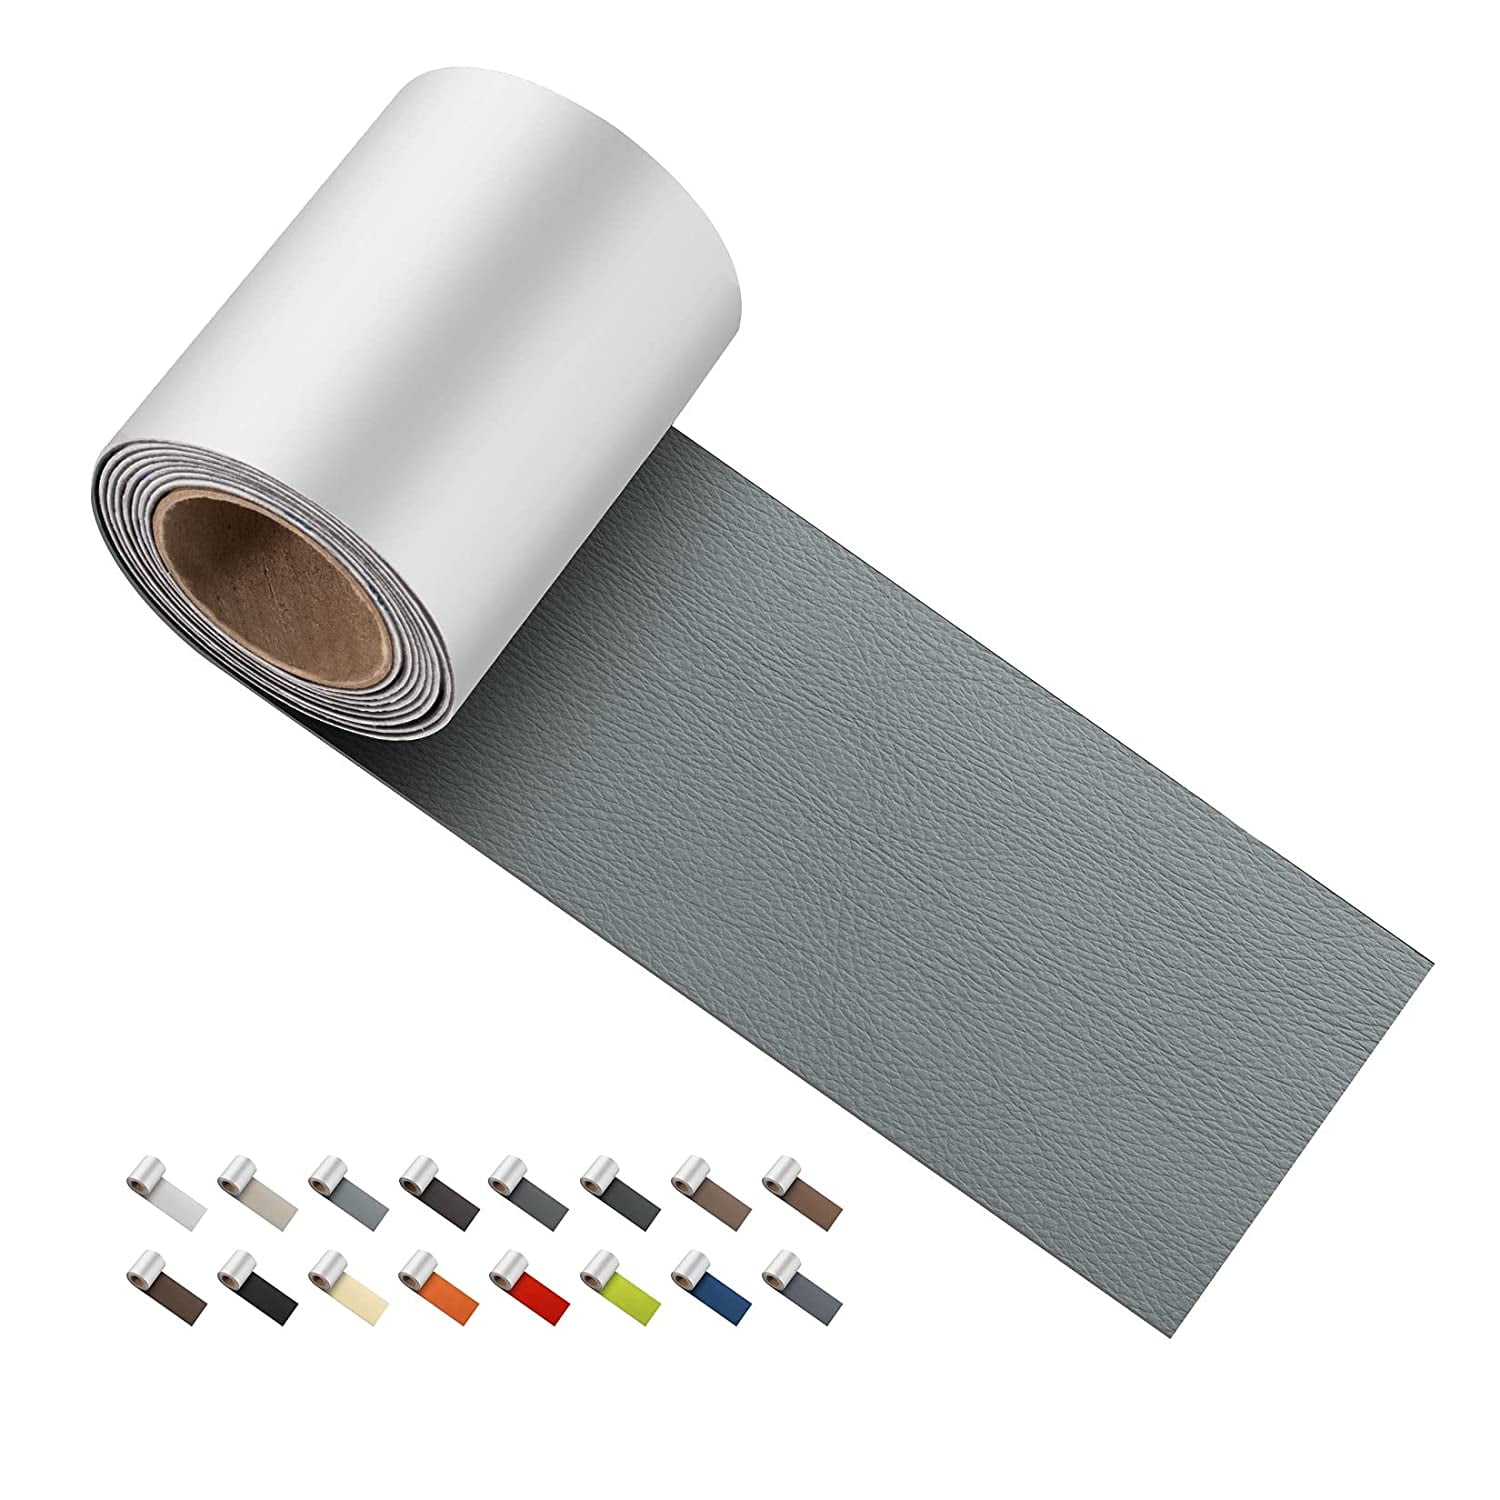 Leather Repair Tape Patch Kit Self Adhesive Brown,4X60 inch Multiple Colors Waterproof Patch Leather for Couch,Sofa,Car Seat Handbag,Furniture,Drivers Seat,Jacket,First Aid Vinyl Repair kit 